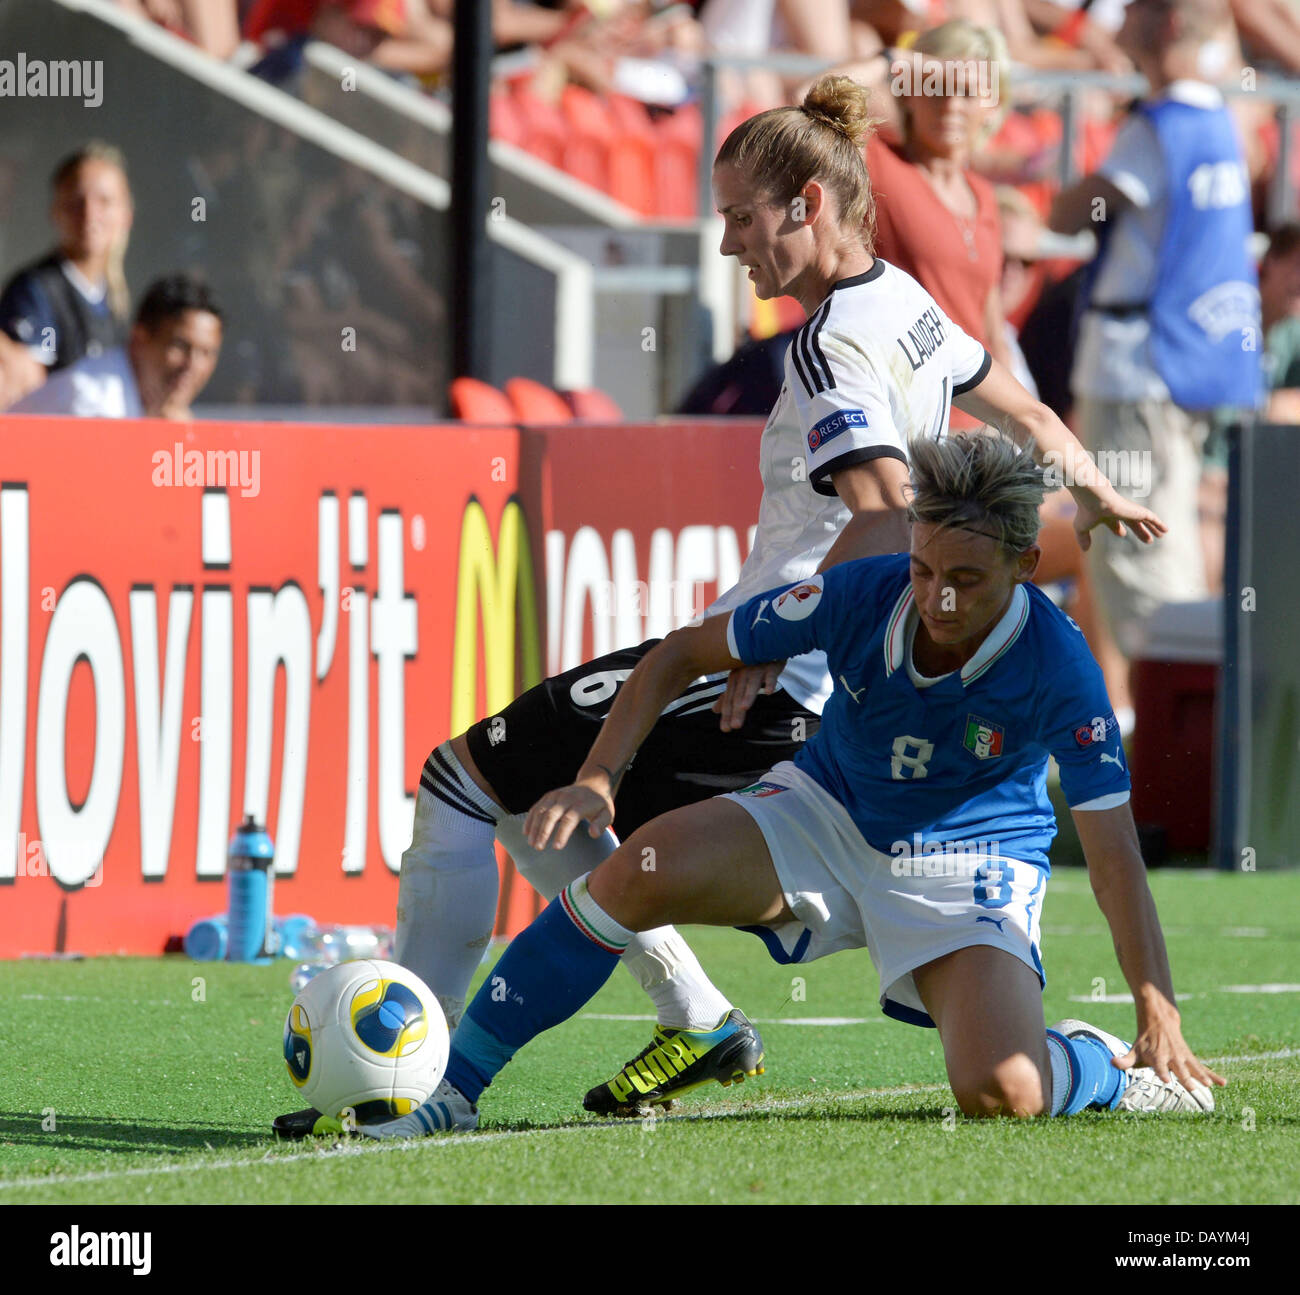 Simone Laudehr (l) of Germany fights for the ball with Melania Gabbiadini of Italy during the UEFA Women's EURO 2013 quarter final soccer match between Germany and Italy at the Växjö Arena in Vaxjo, Sweden, 21 July 2013. Photo: Carmen Jaspersen/dpa +++(c) dpa - Bildfunk+++ Stock Photo